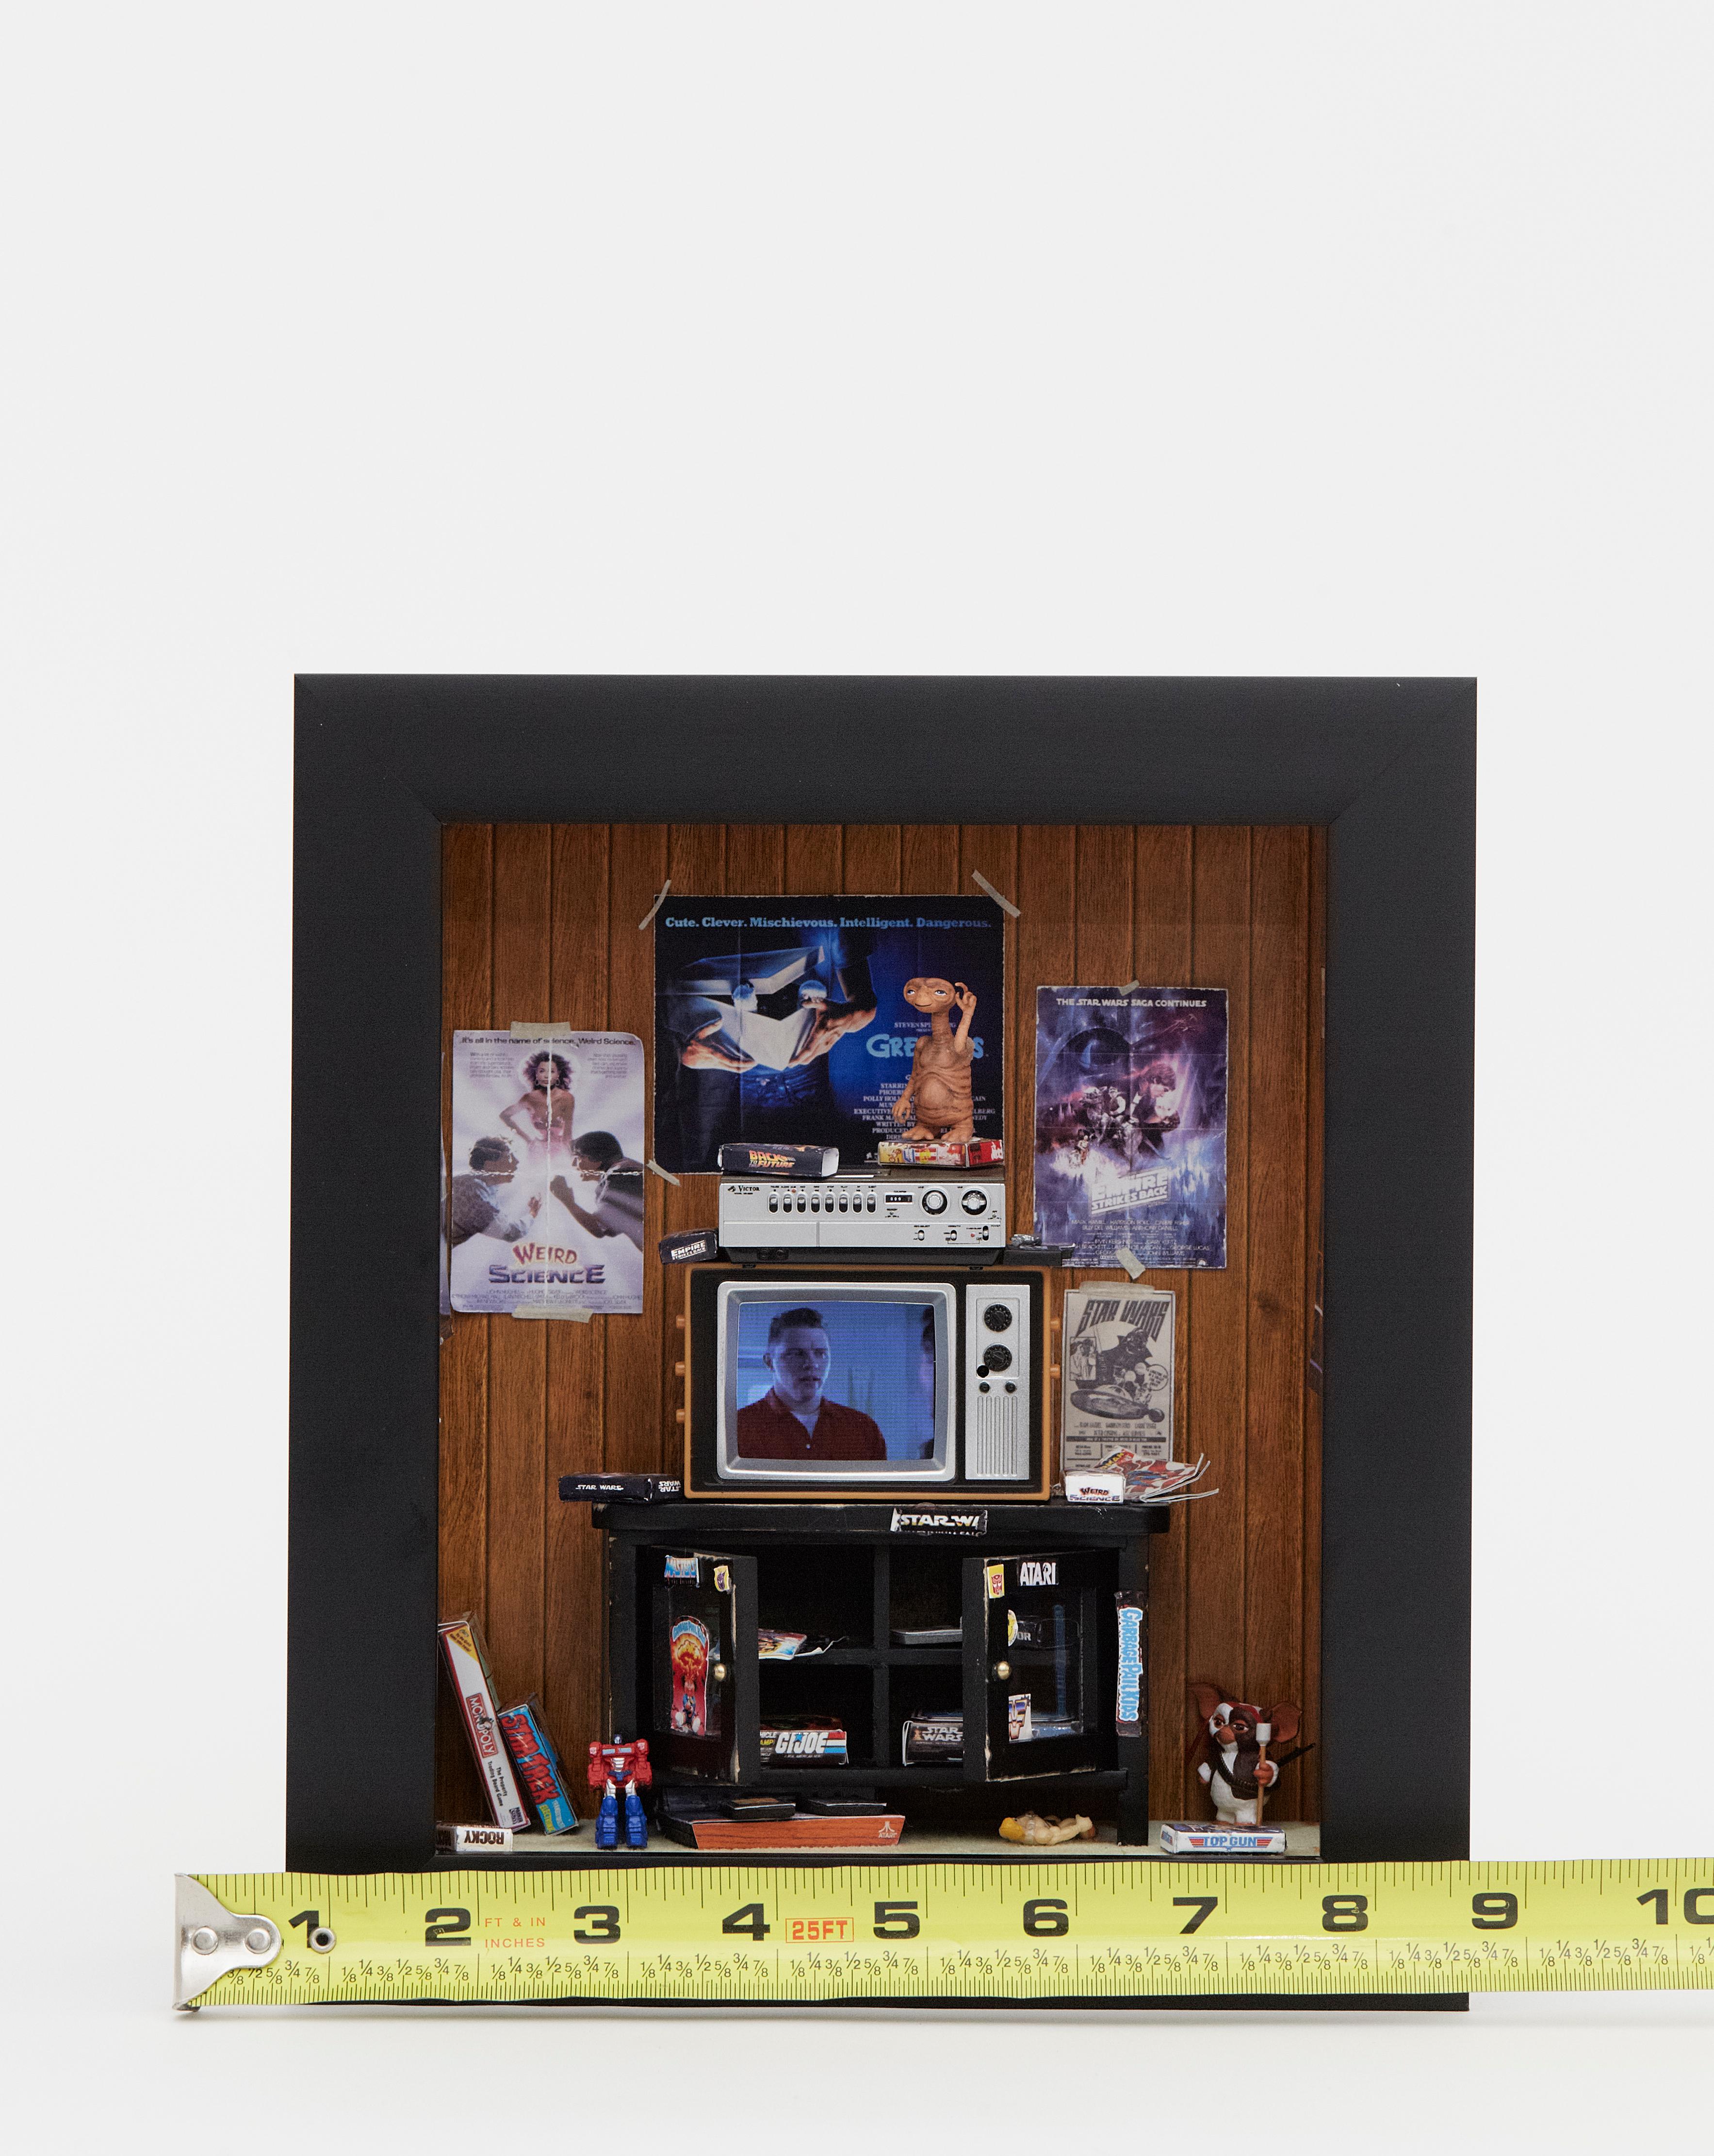 MINIATURE GEN X ROOM CASE STUDY -001-PG-13
Transport yourself back to 1988 with this handmade room box featuring:
-Working T.V. w remote playing movie clips from Back to the Future (licensed by Universal)
-Handmade 80's movie posters. Distressed by